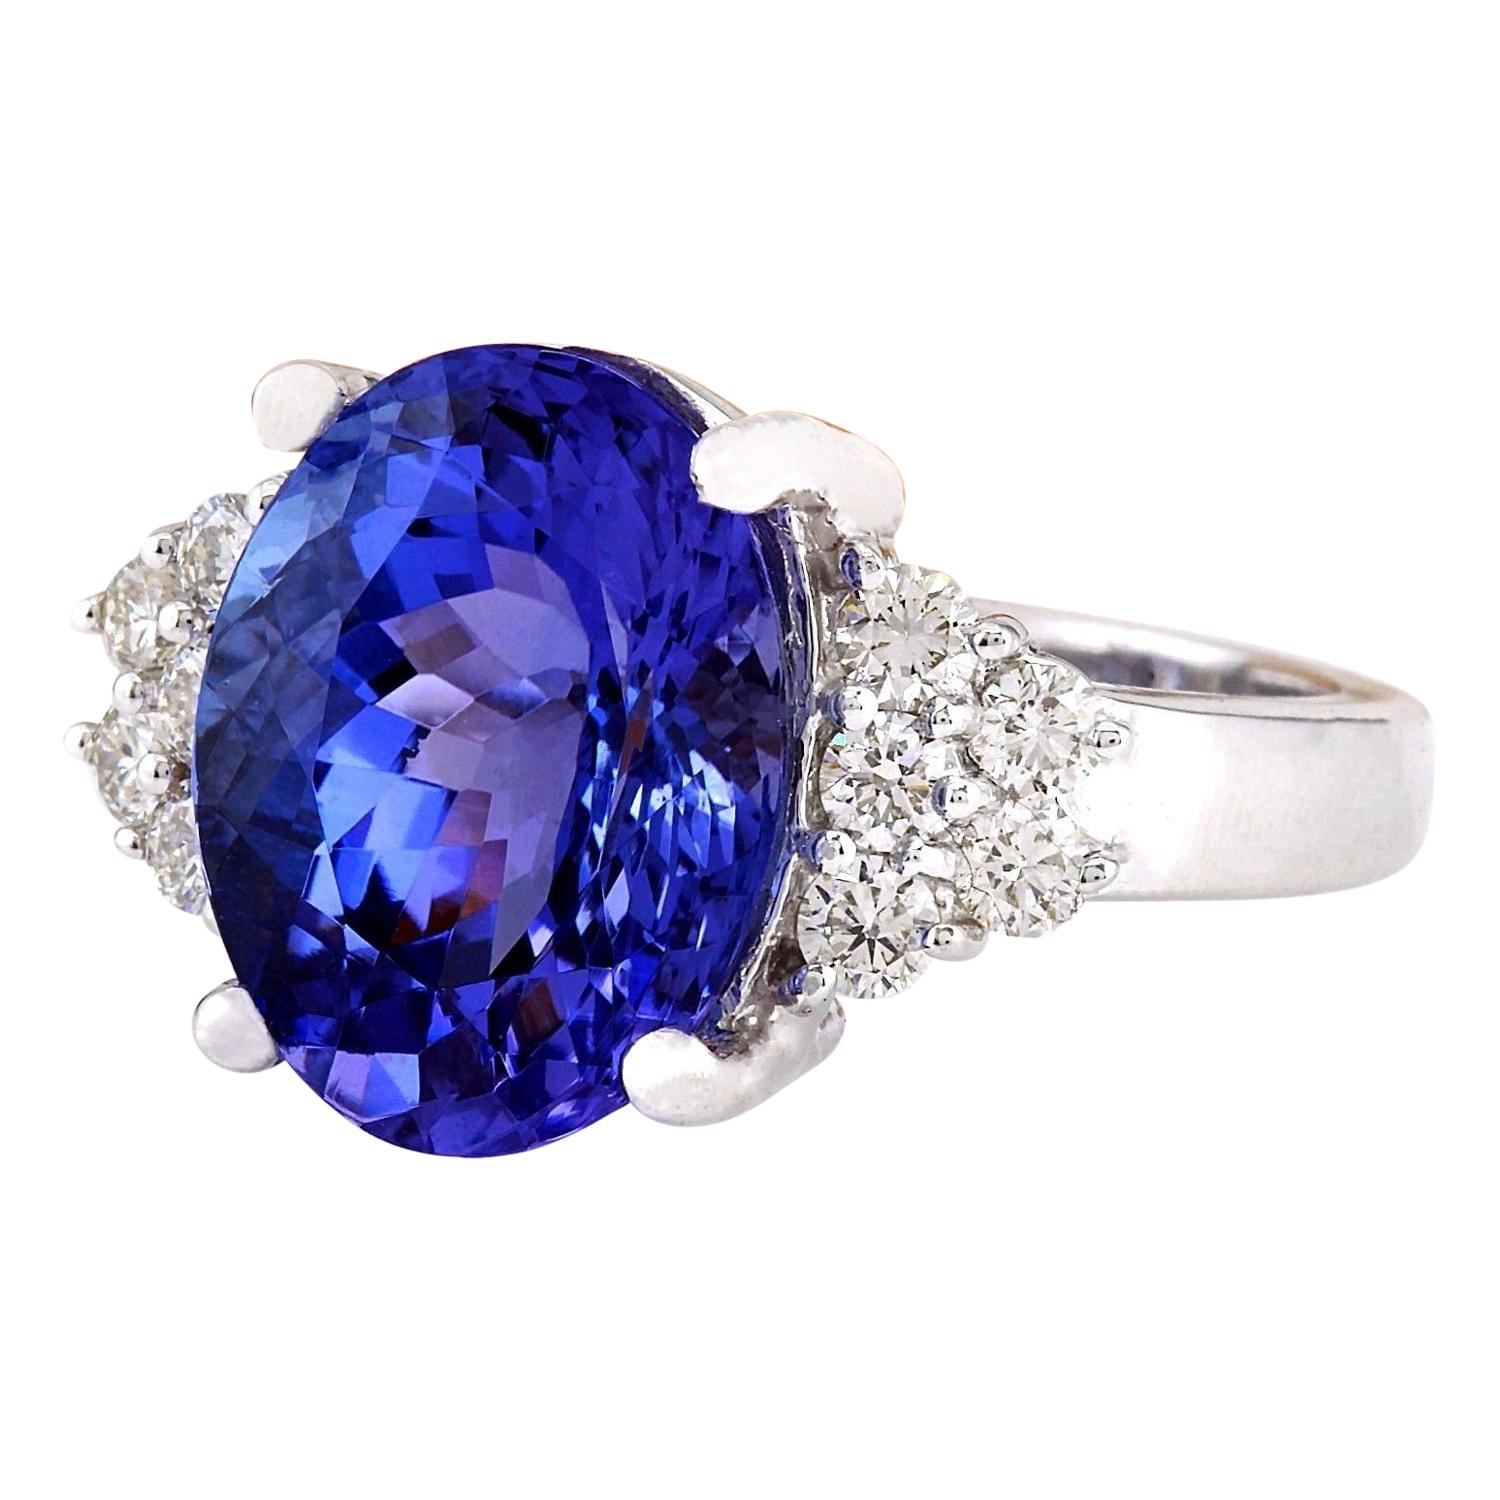 Introducing our exquisite 8.40 Carat Tanzanite 14K Solid White Gold Diamond Ring. Crafted from authentic 14K White Gold, this ring boasts a total metal weight of 6.6 grams, ensuring both quality and durability. At its center gleams a stunning